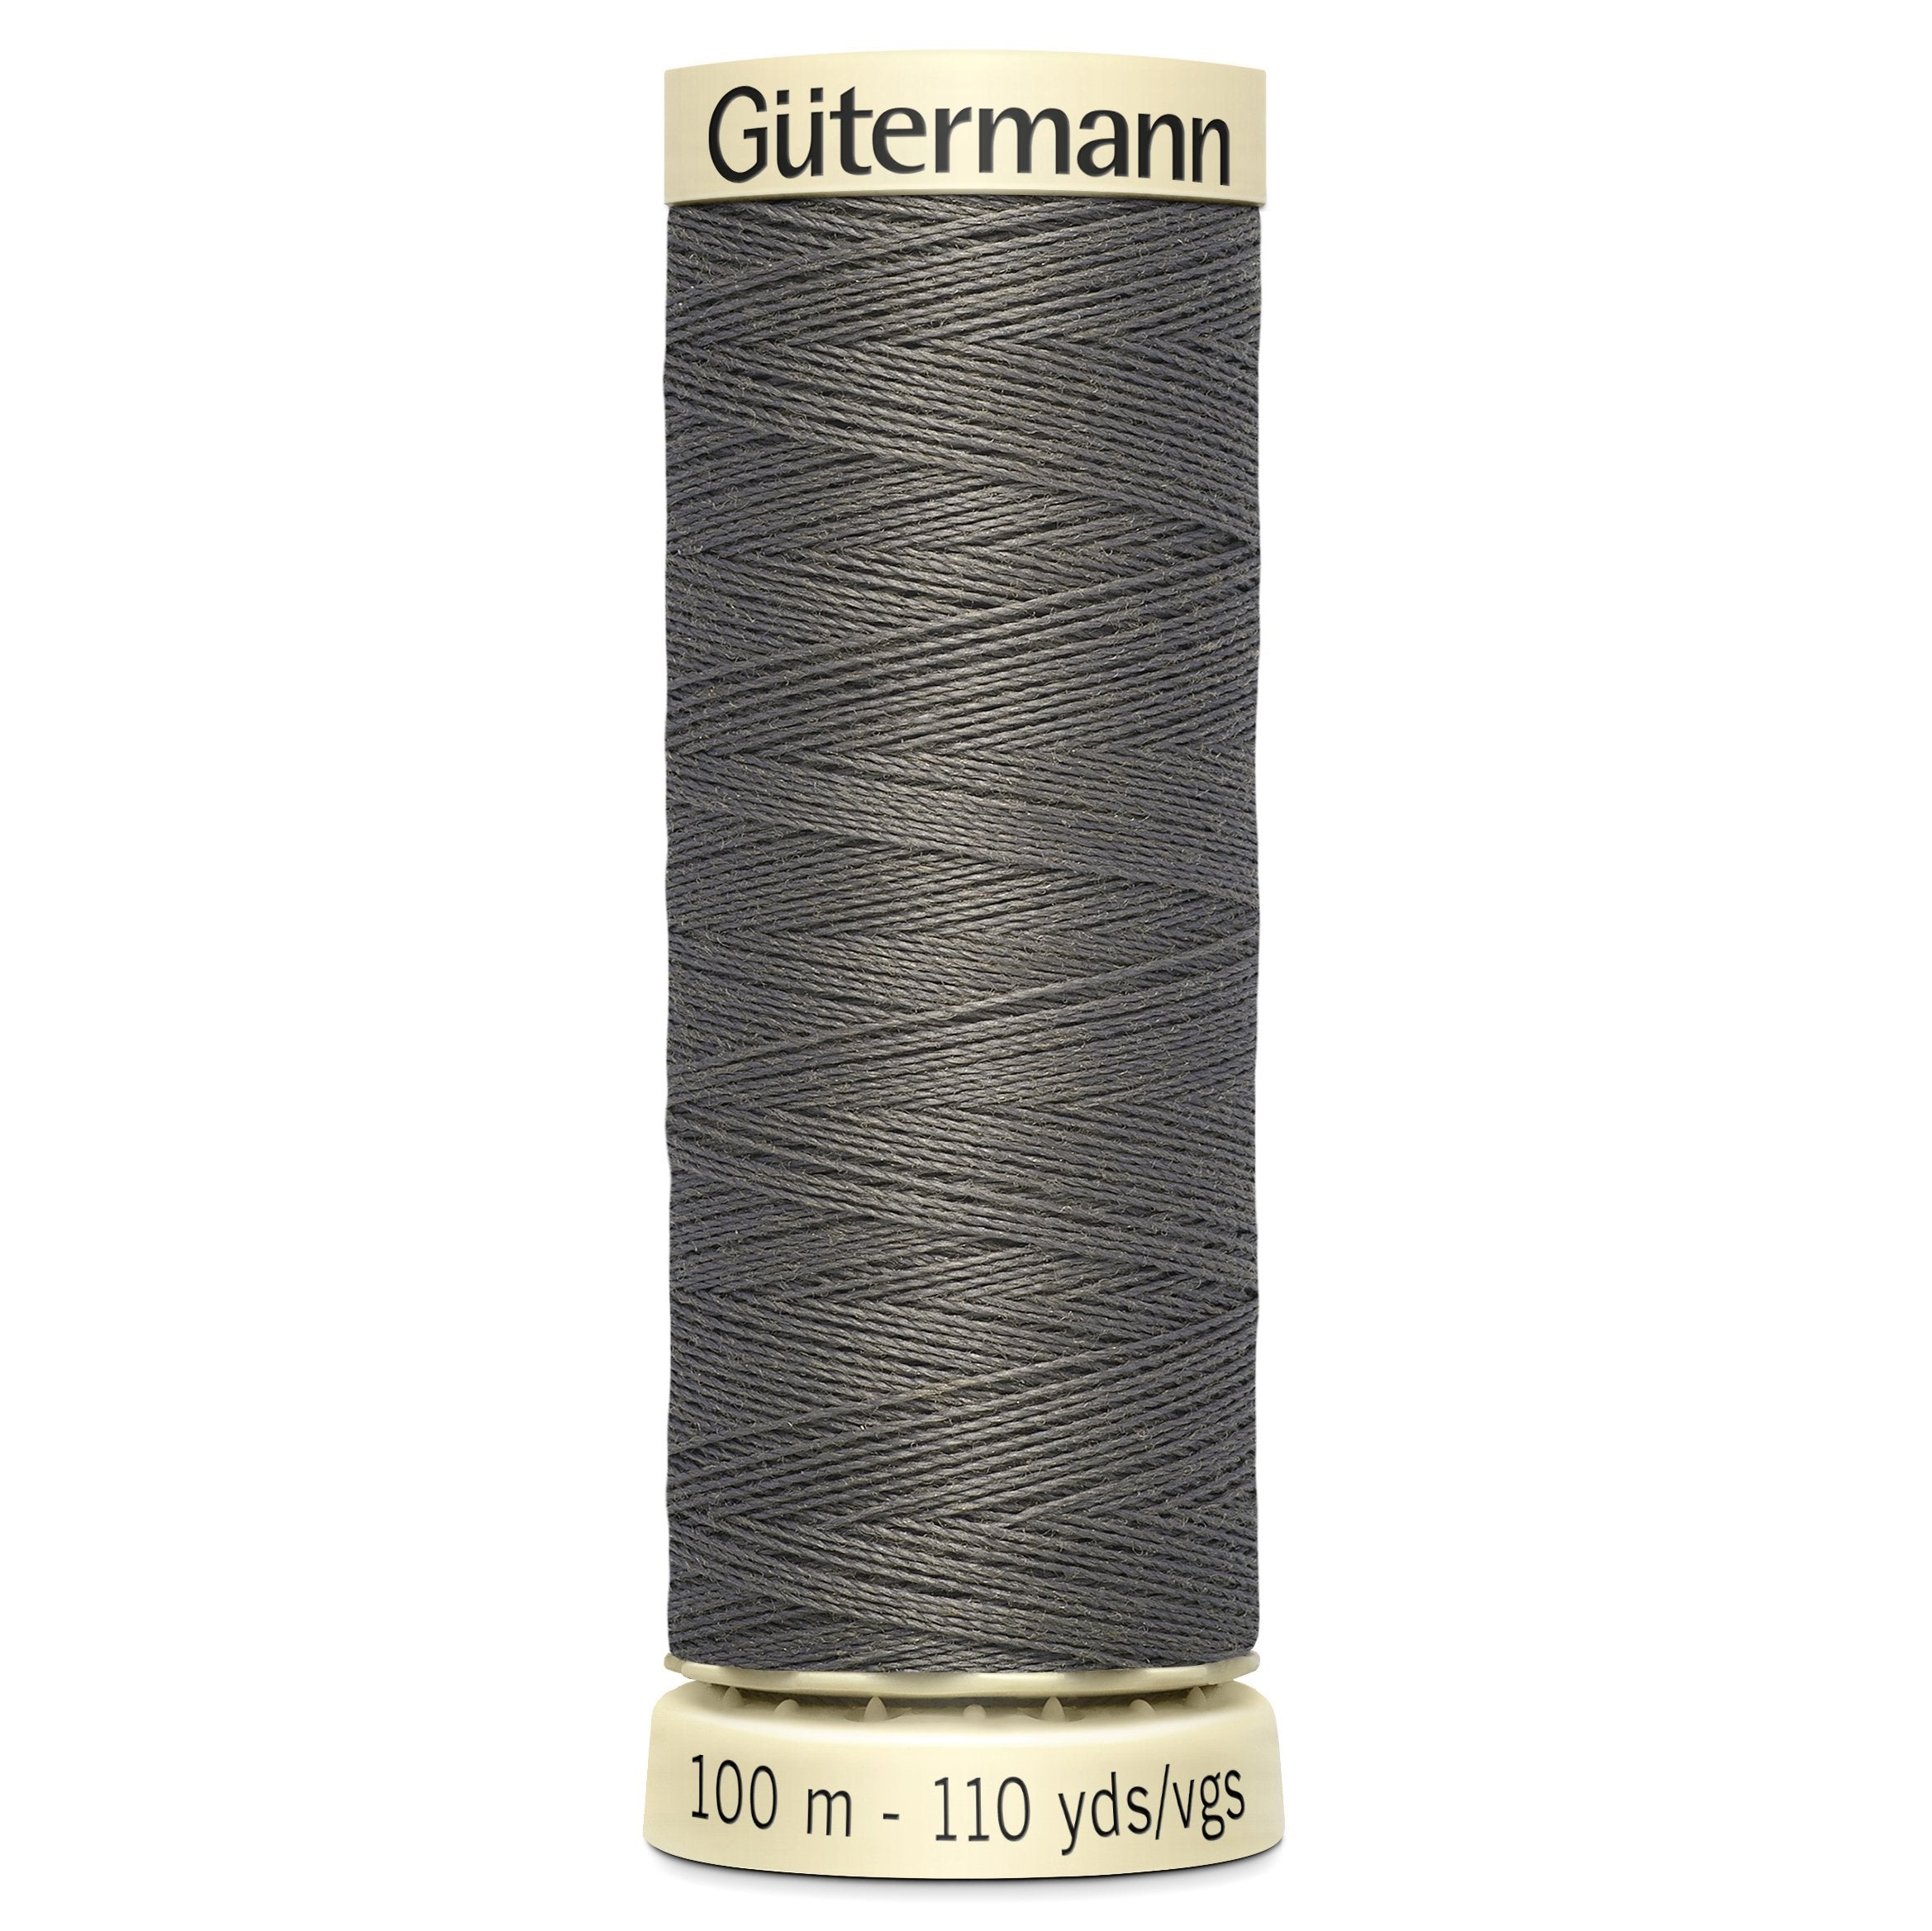 Gutermann Sew All Thread colour 35 Grey from Jaycotts Sewing Supplies